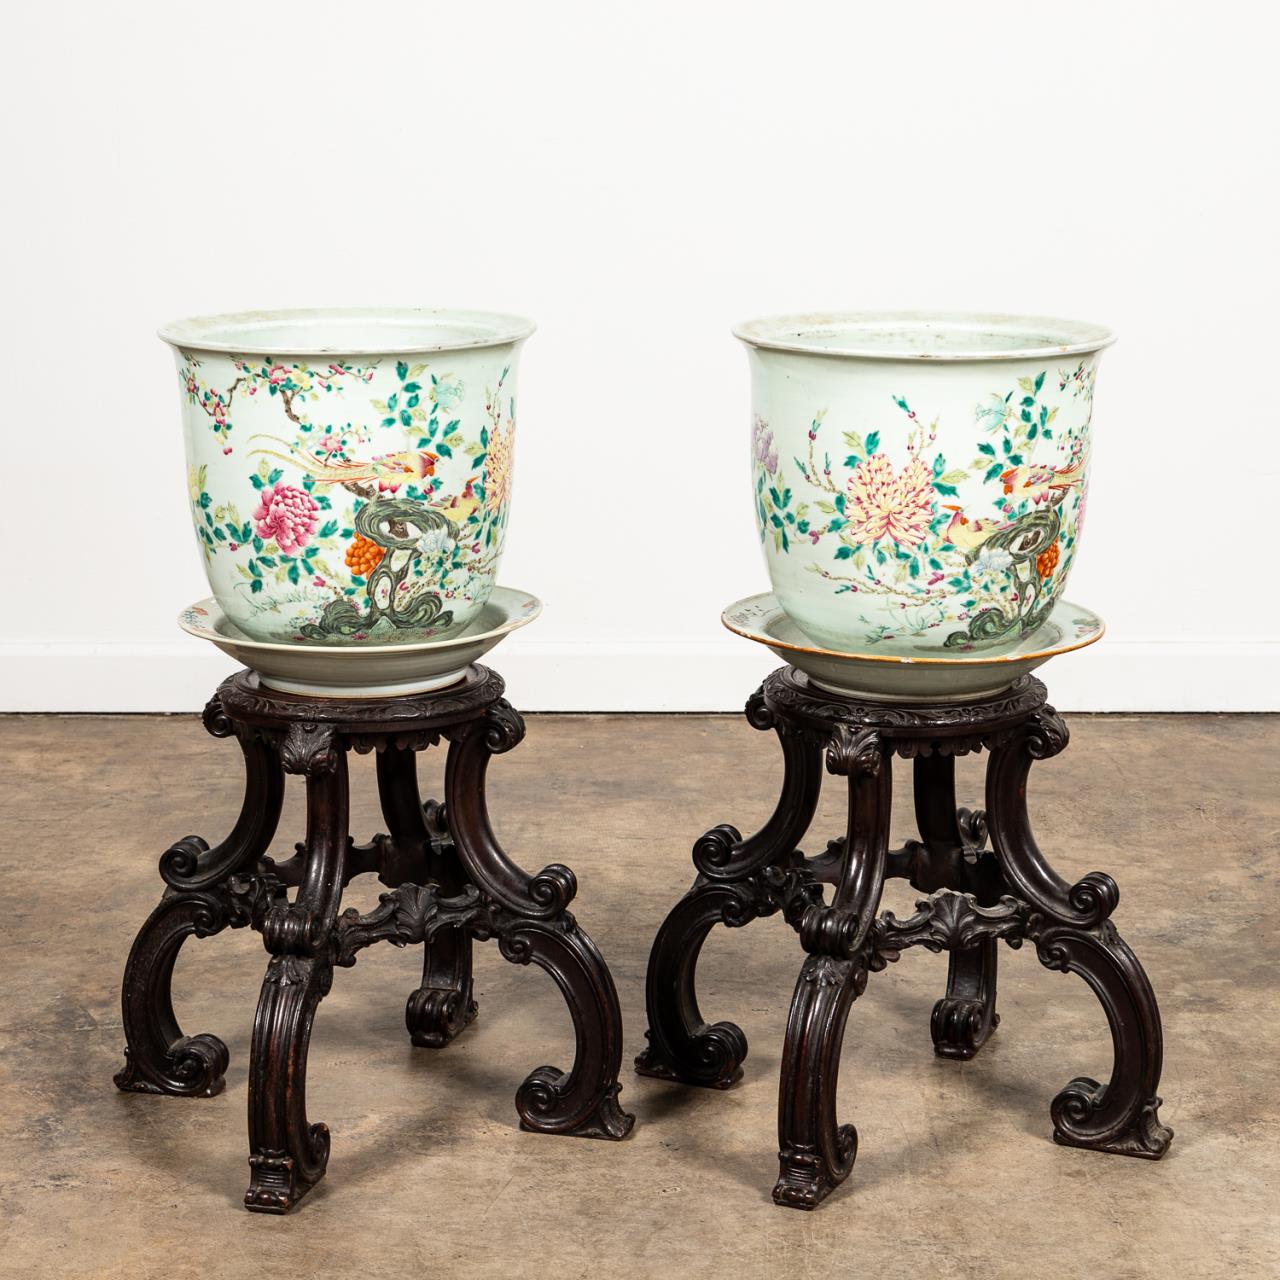 PAIR CHINESE PORCELAIN PLANTERS 359b33